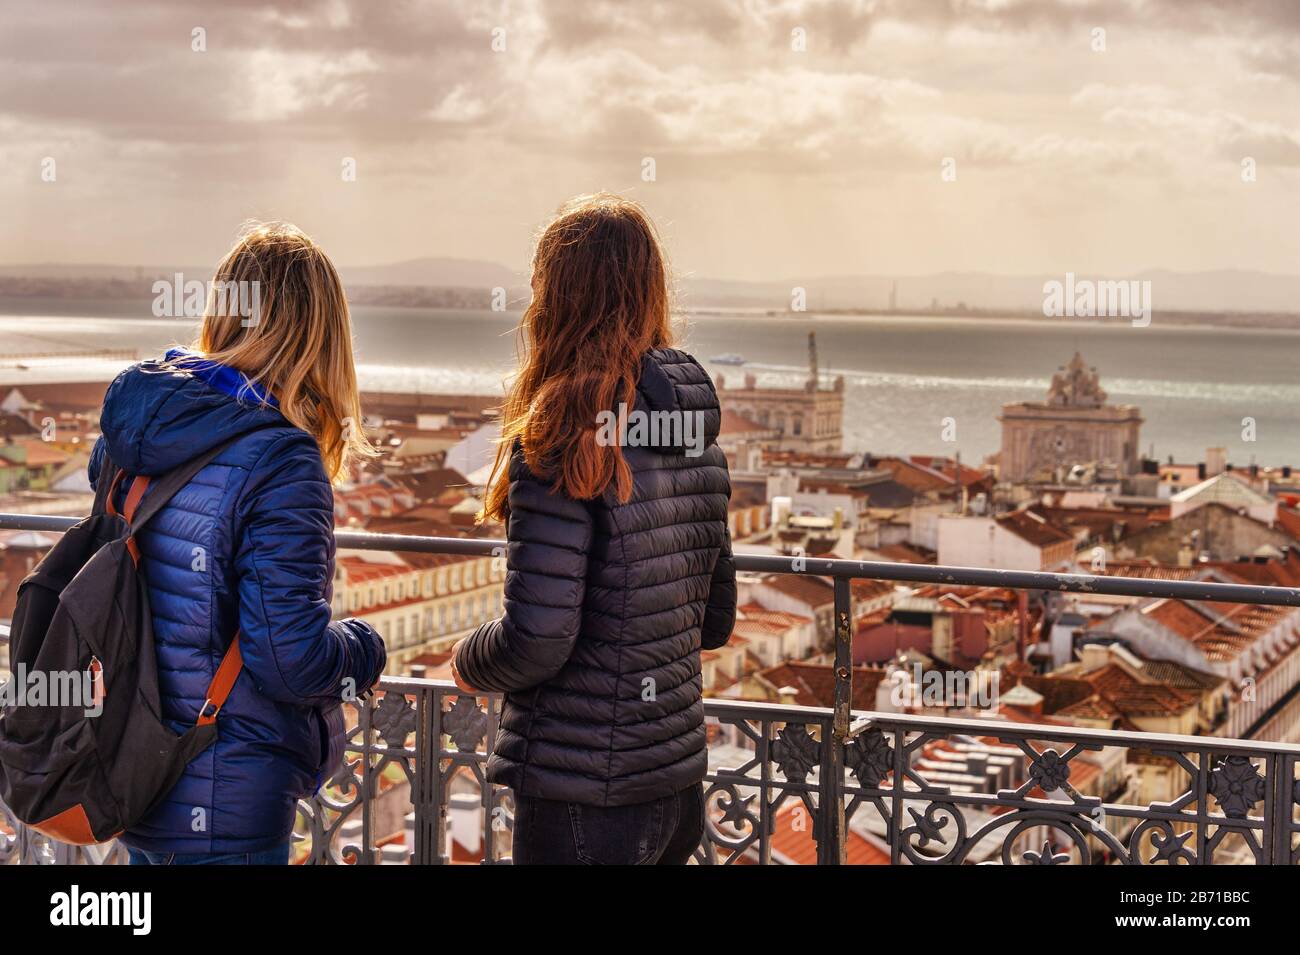 Tourists looking at the view from Elevador de Santa Justa. Arco da Rua Augusta in the background. Stock Photo